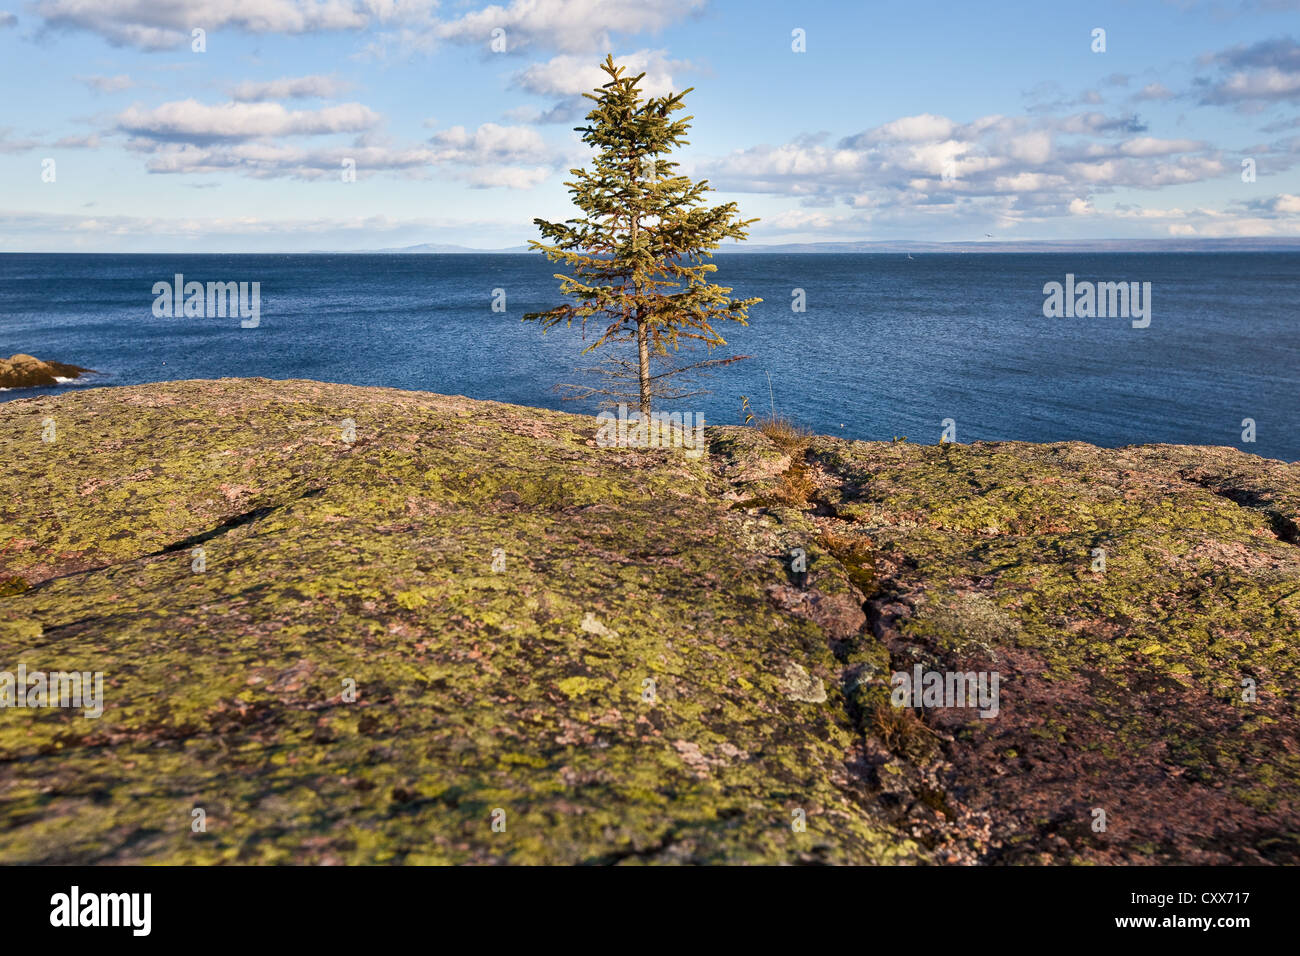 A small fir grows near a rock covered with crustose and foliose lichens in the St. Lawrence seashore of Essipit in Quebec Stock Photo